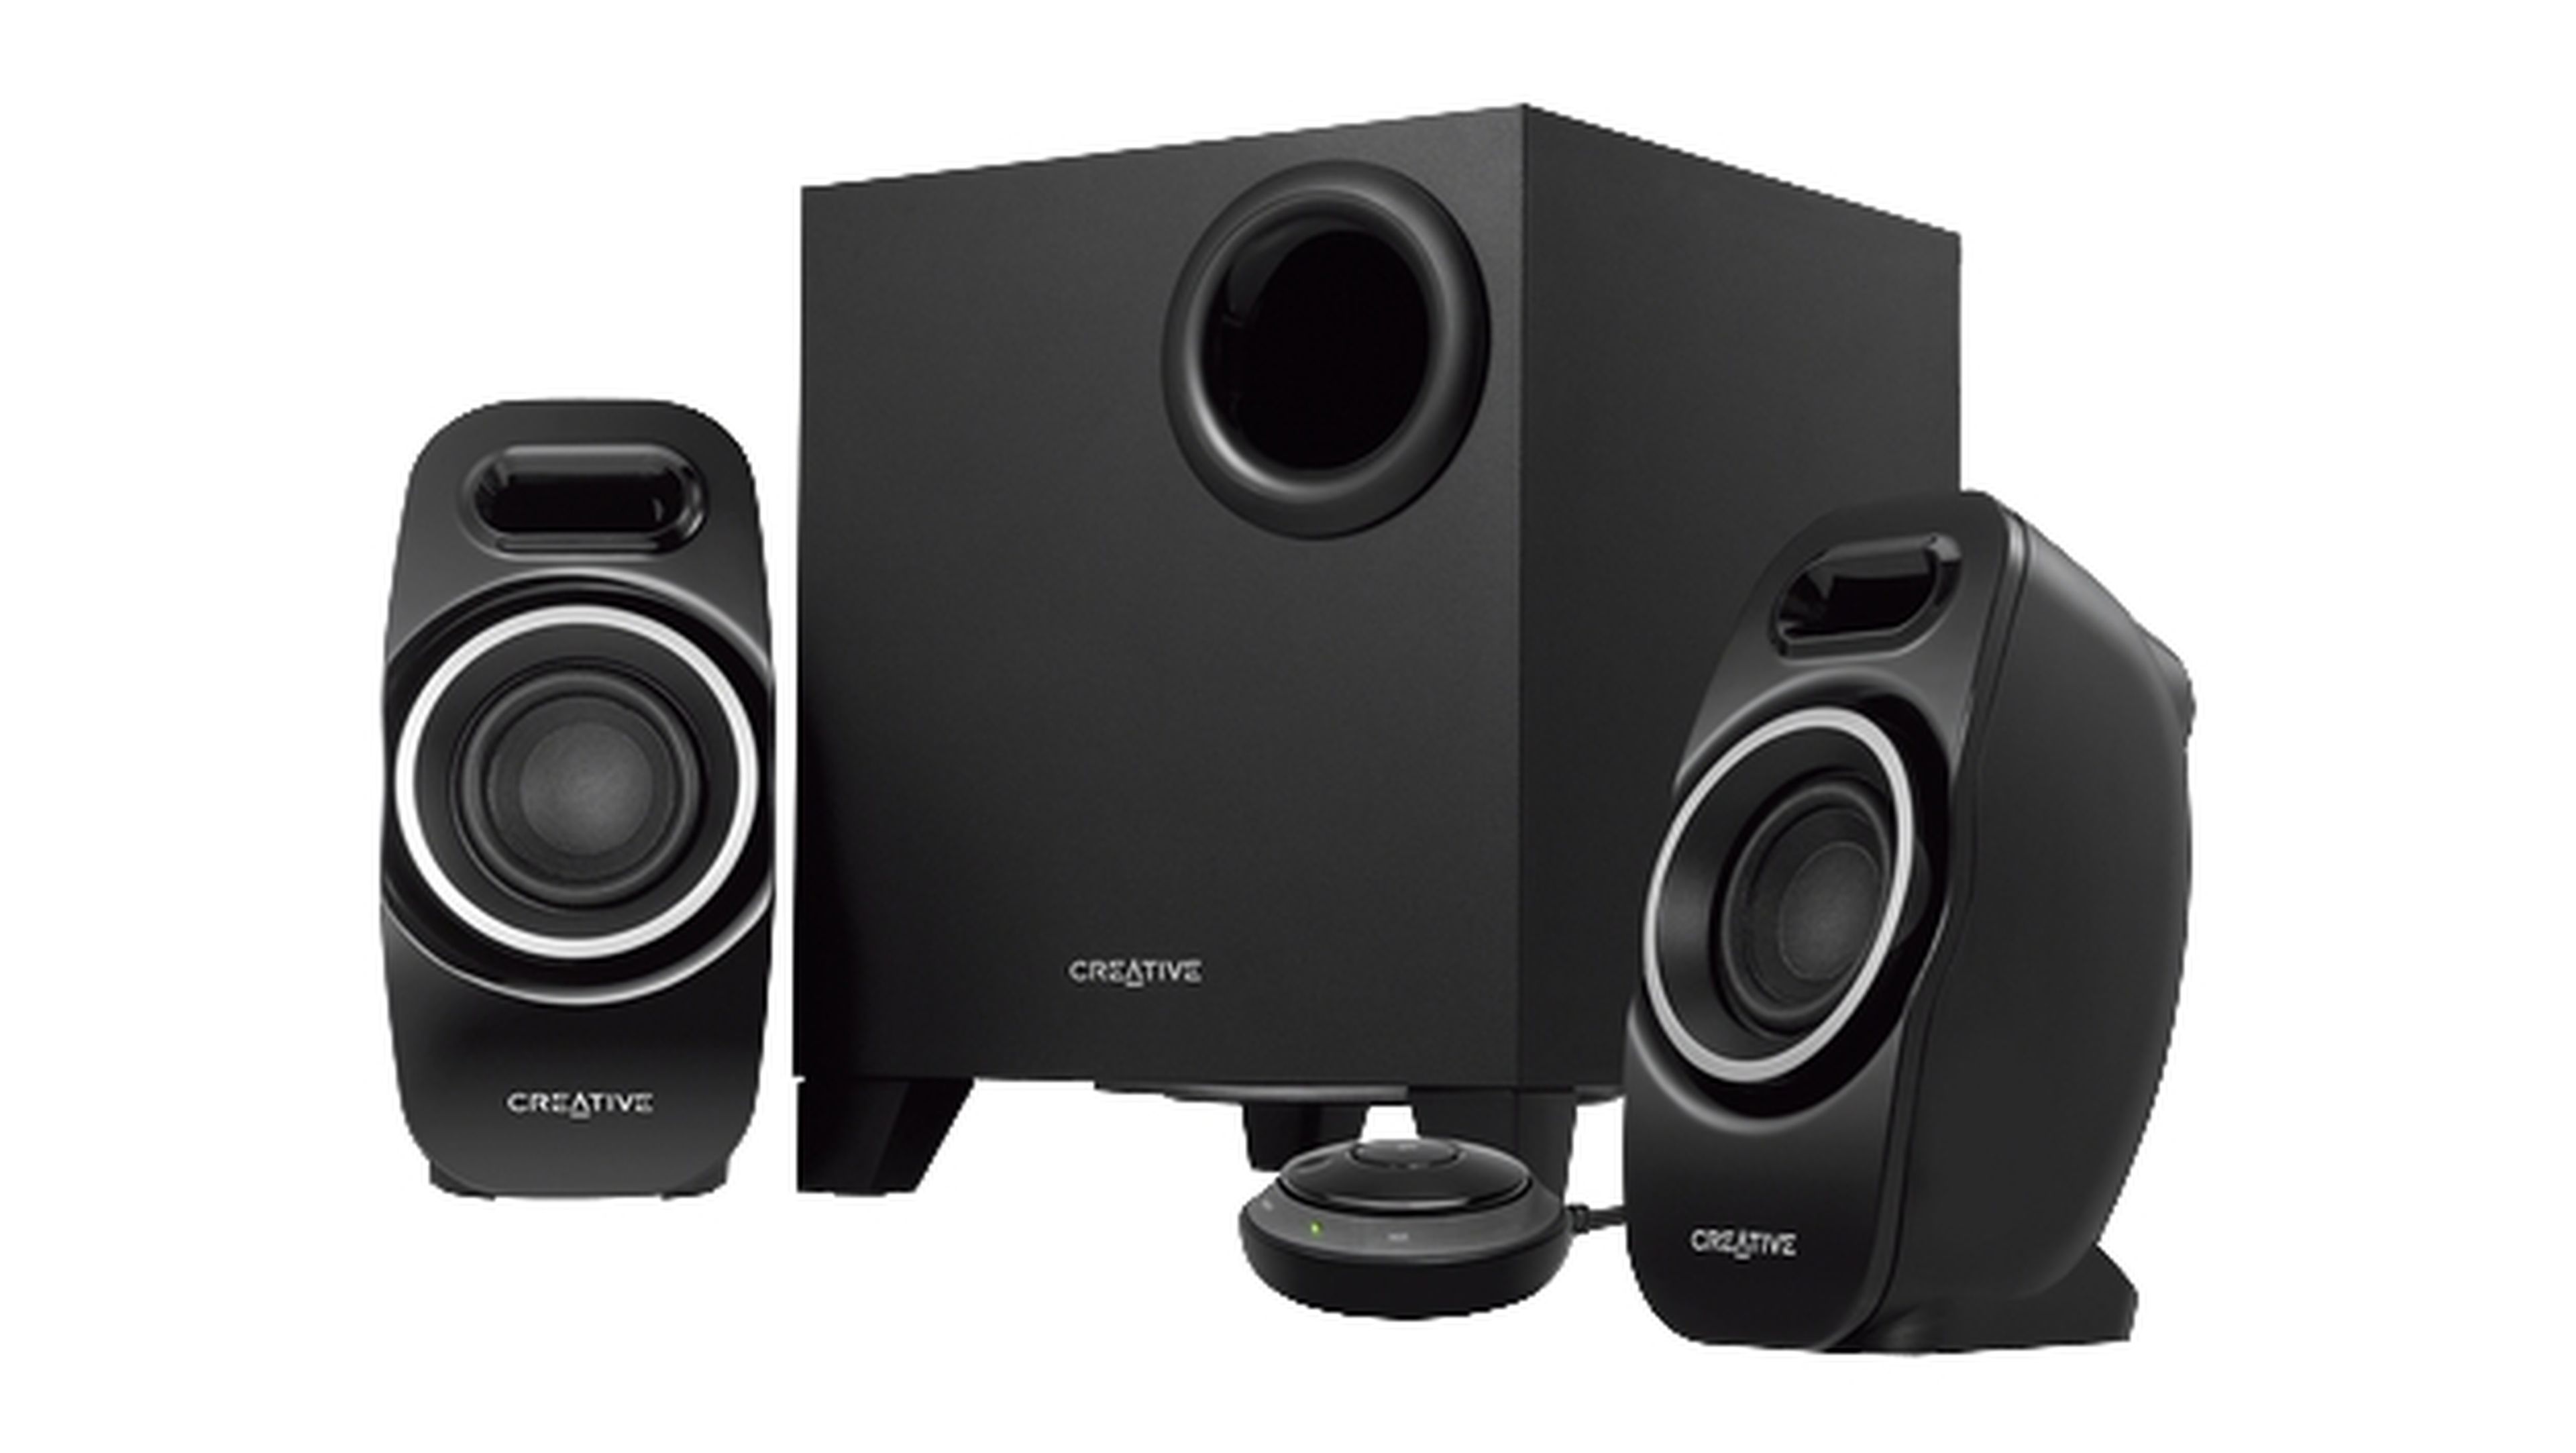 Creative T3250 Wireless, altavoces 2.1 Bluetooth sin cables.